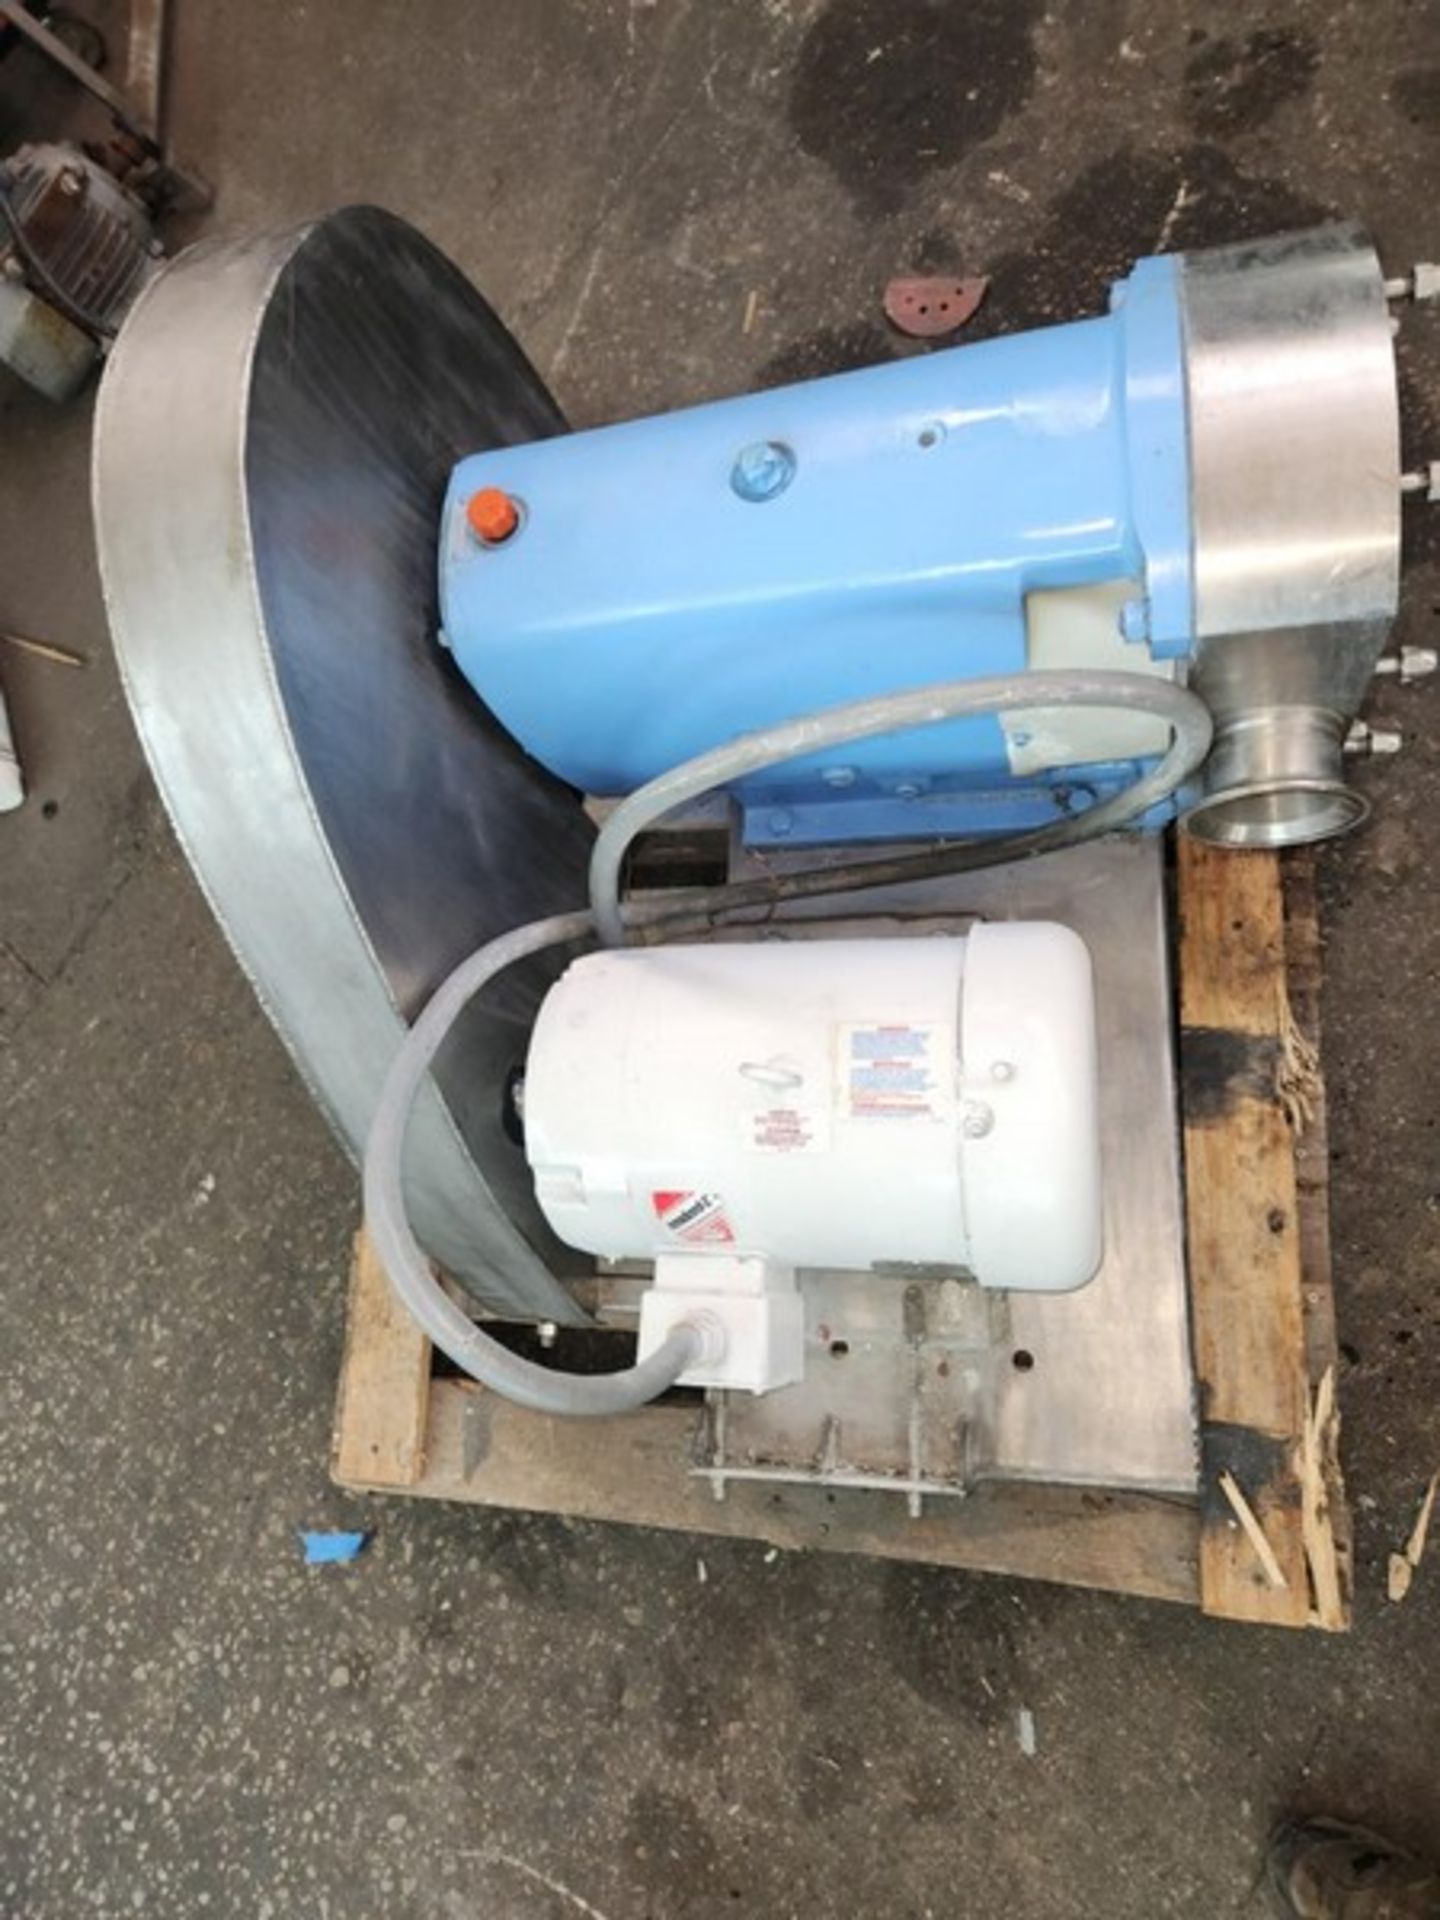 G H (Alfa Laval) 7.5 hp 4" S/S Sanitary Positive Displacement Pump, Model 822, S/N 95-8-50174 with - Image 10 of 15